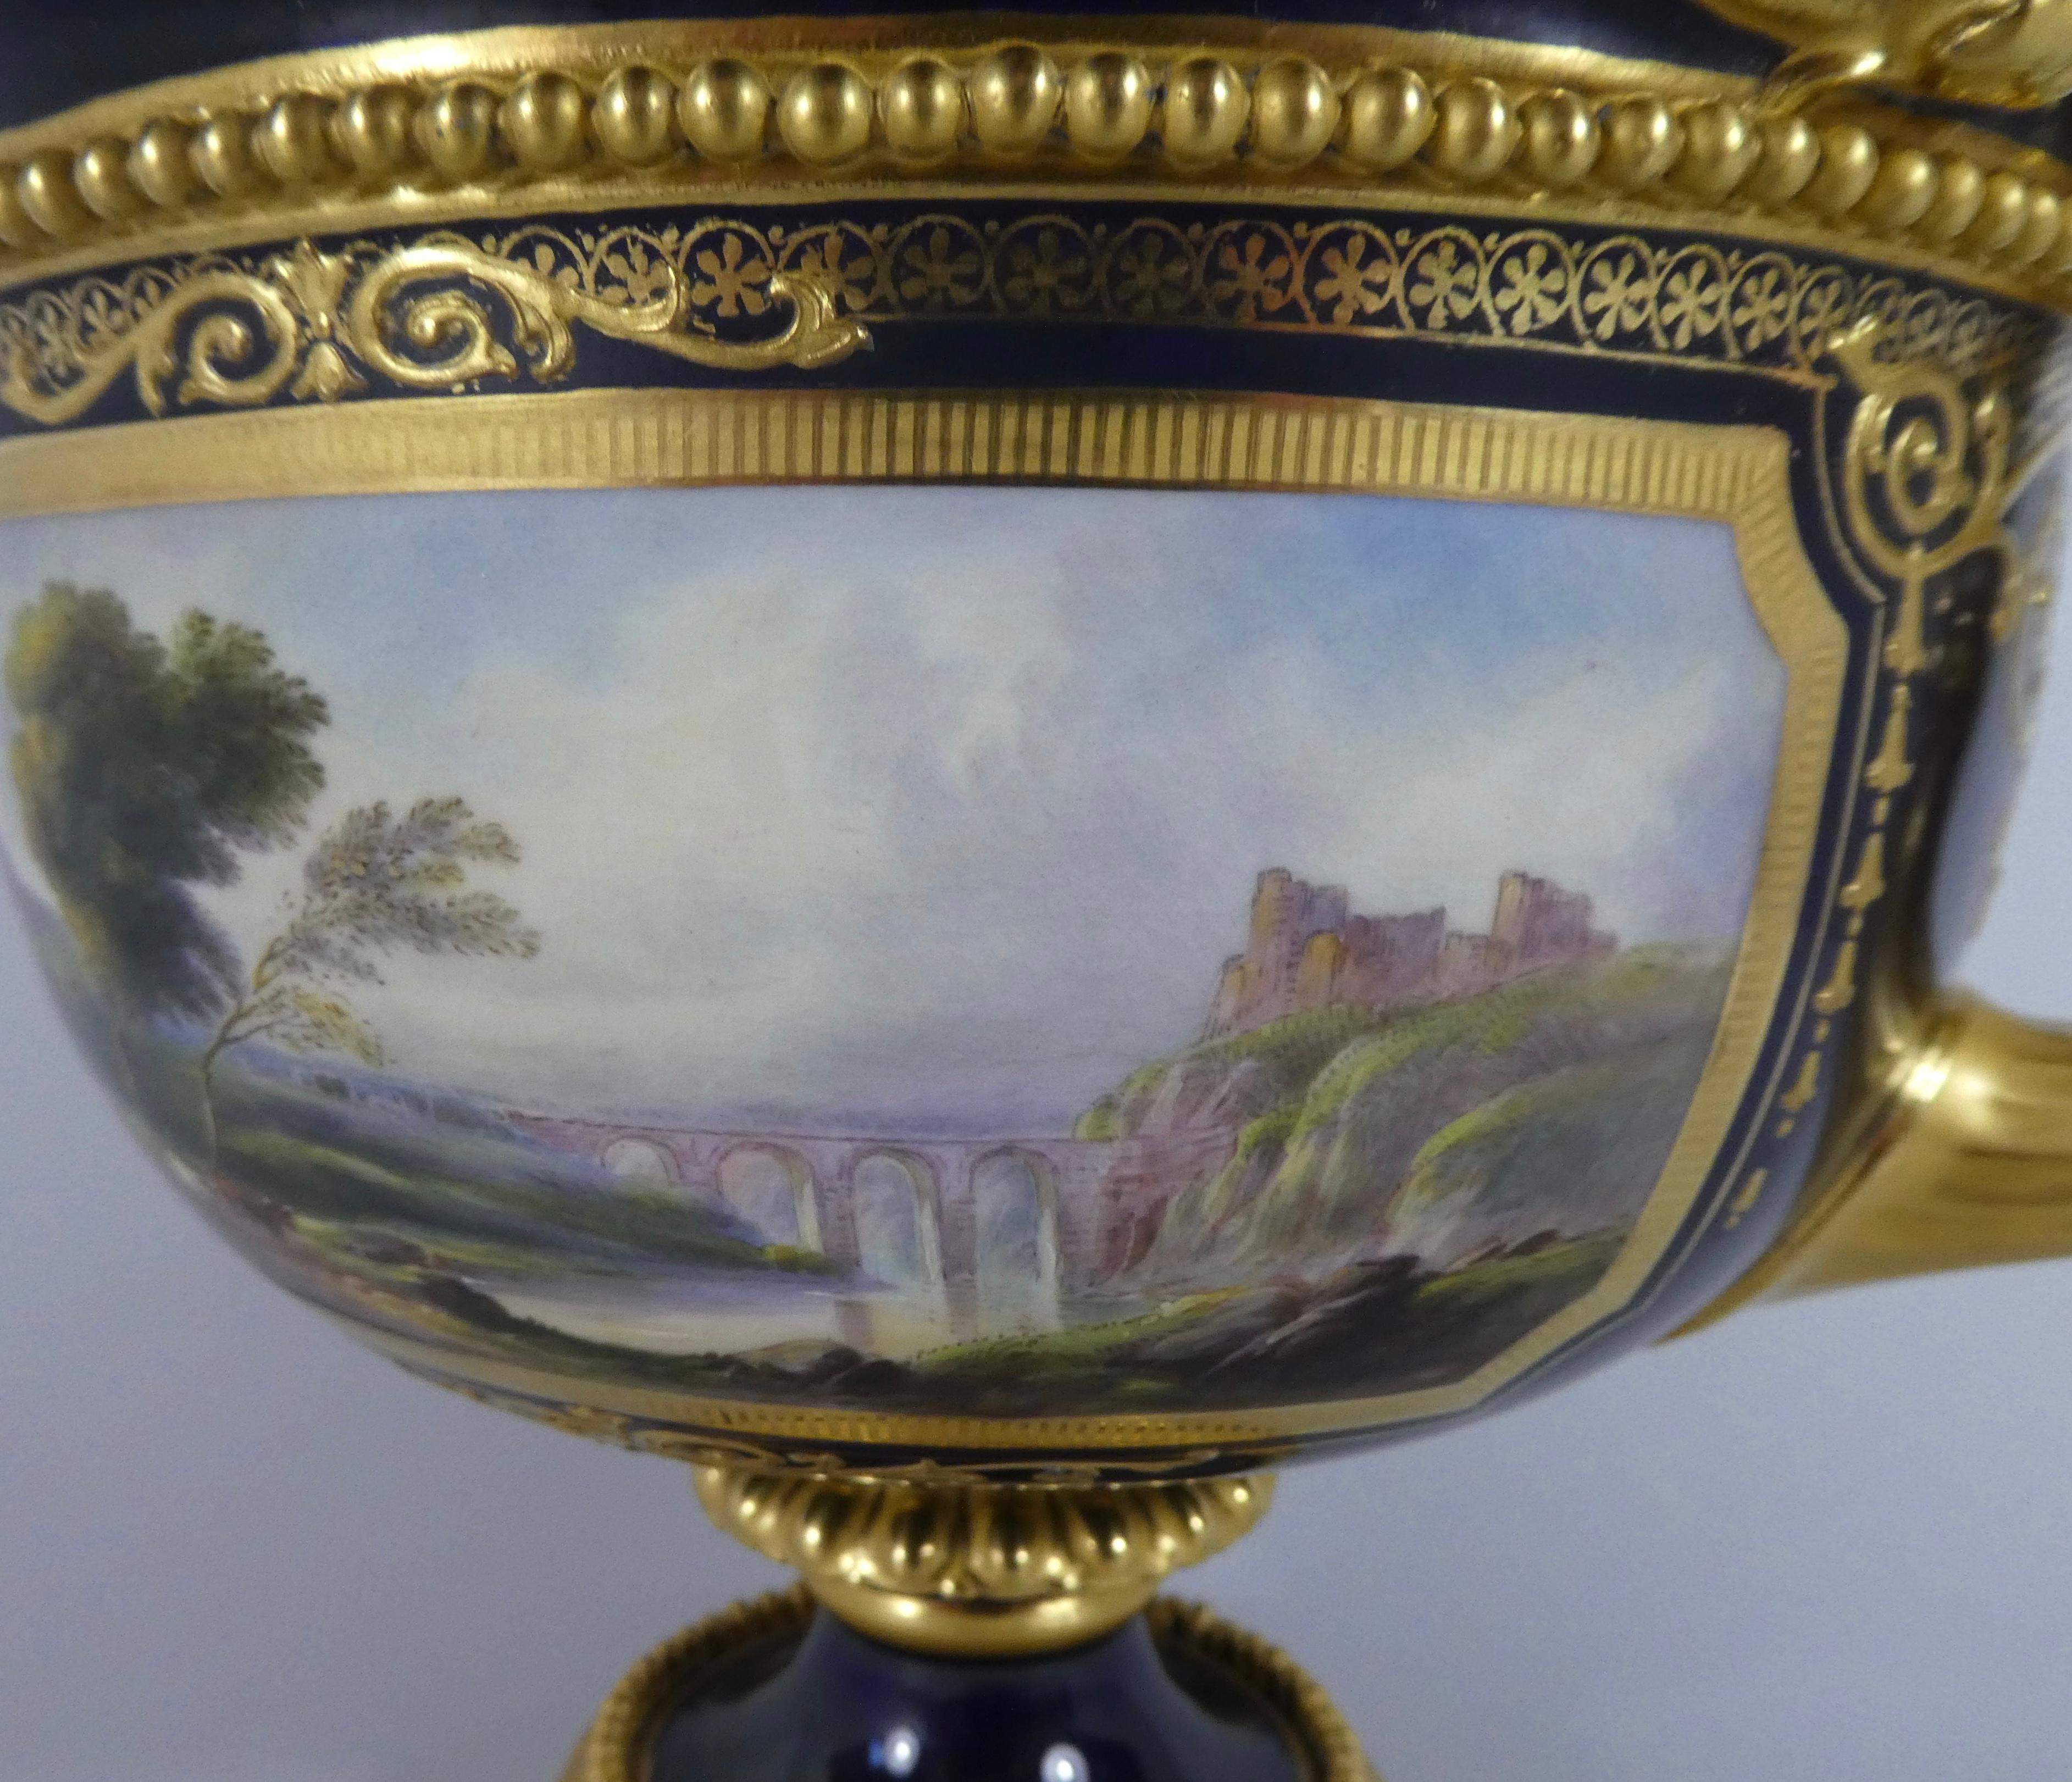 Victorian Royal Worcester porcelain ‘Warwick Vase’, painted by Harry Davis, dated 1925.